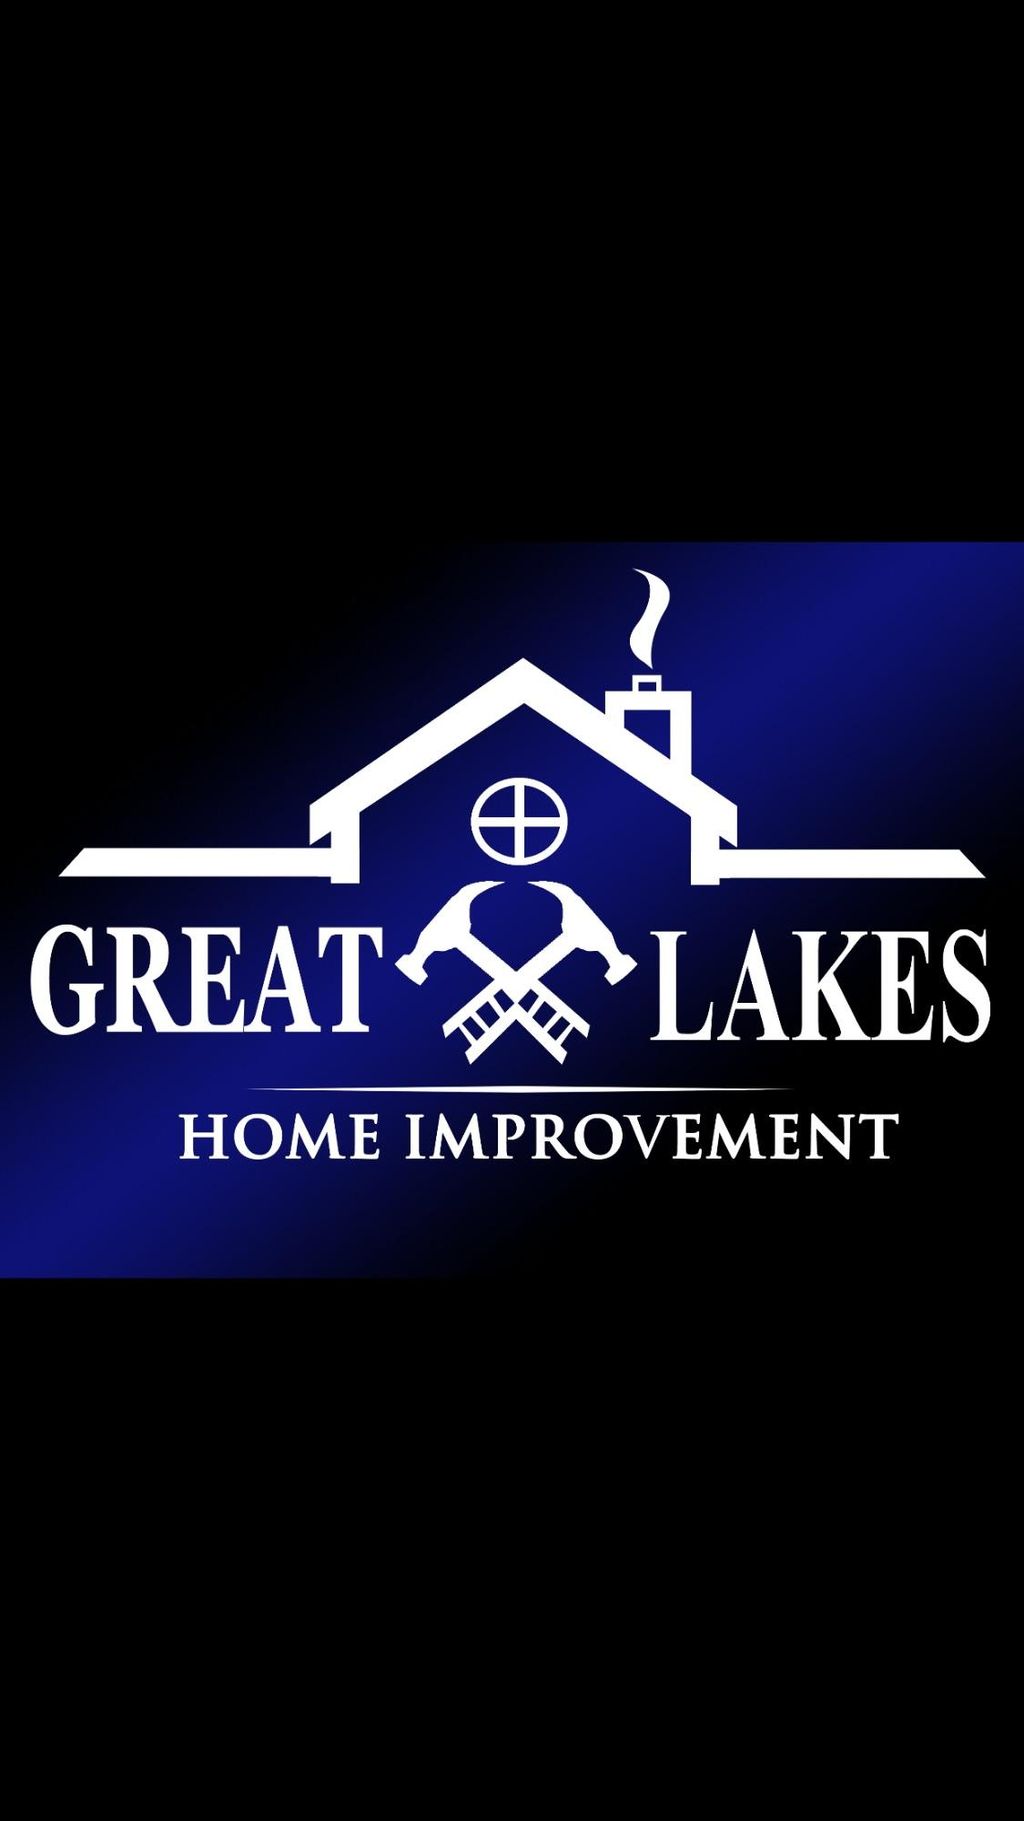 Great Lakes Home Improvement